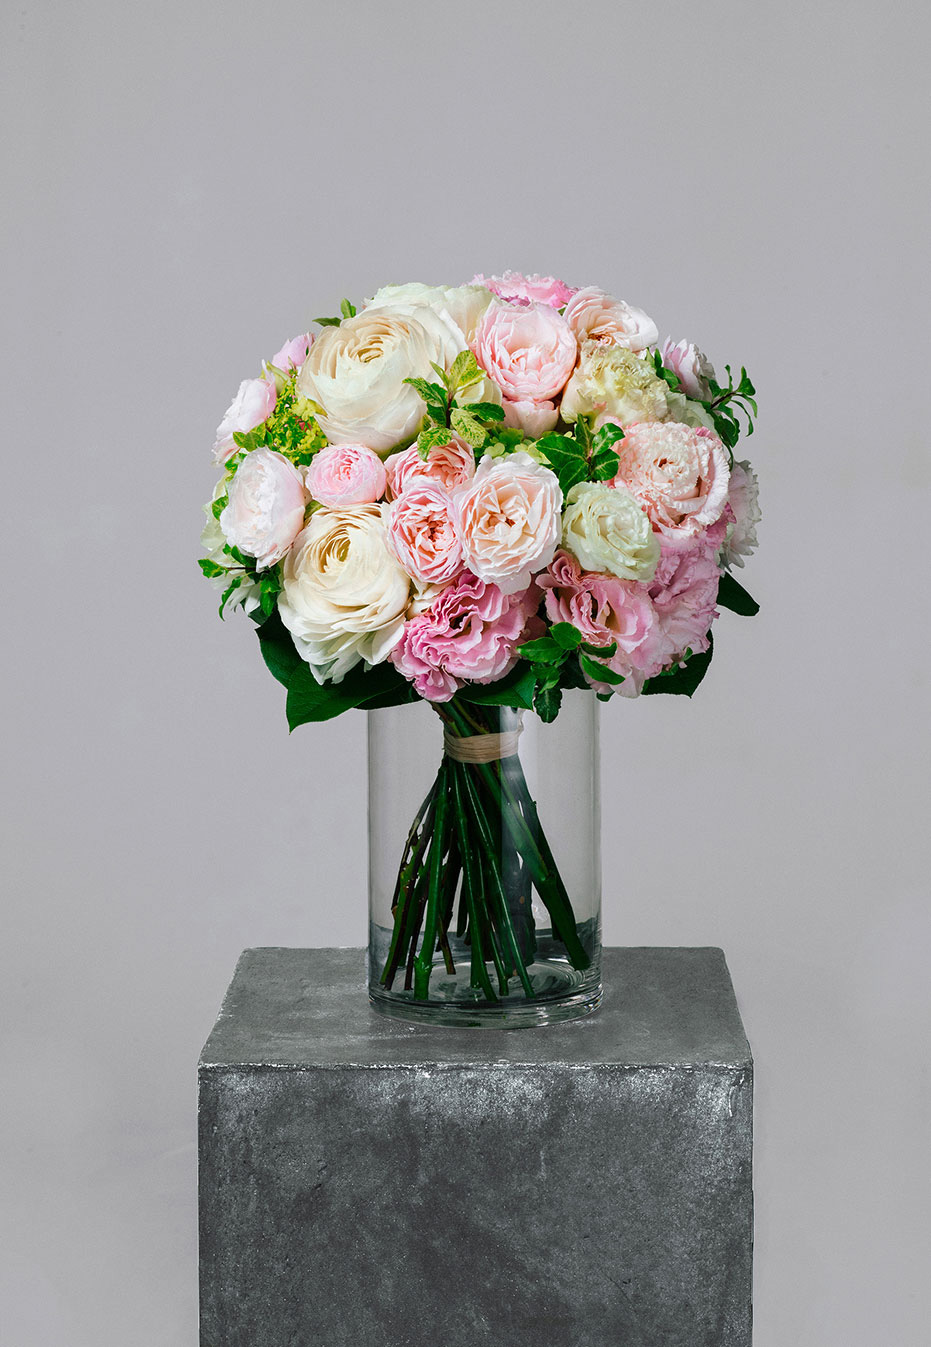  flower bouquet of ranunculus and rose by flannel flowers